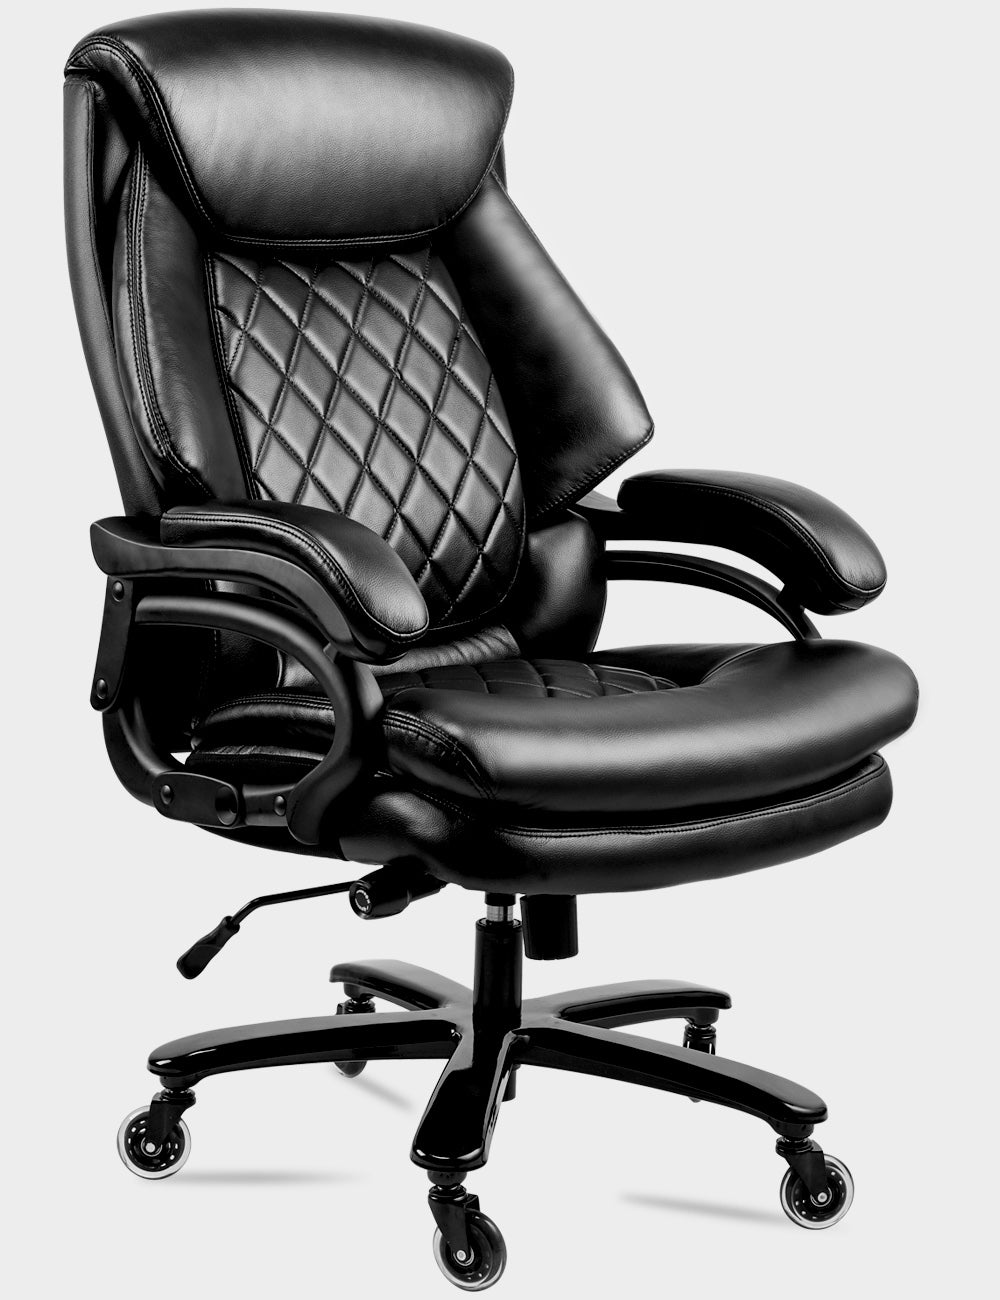 Executive Office Desk Chair for Heavy People HC-8036 – WILLMITA STORE